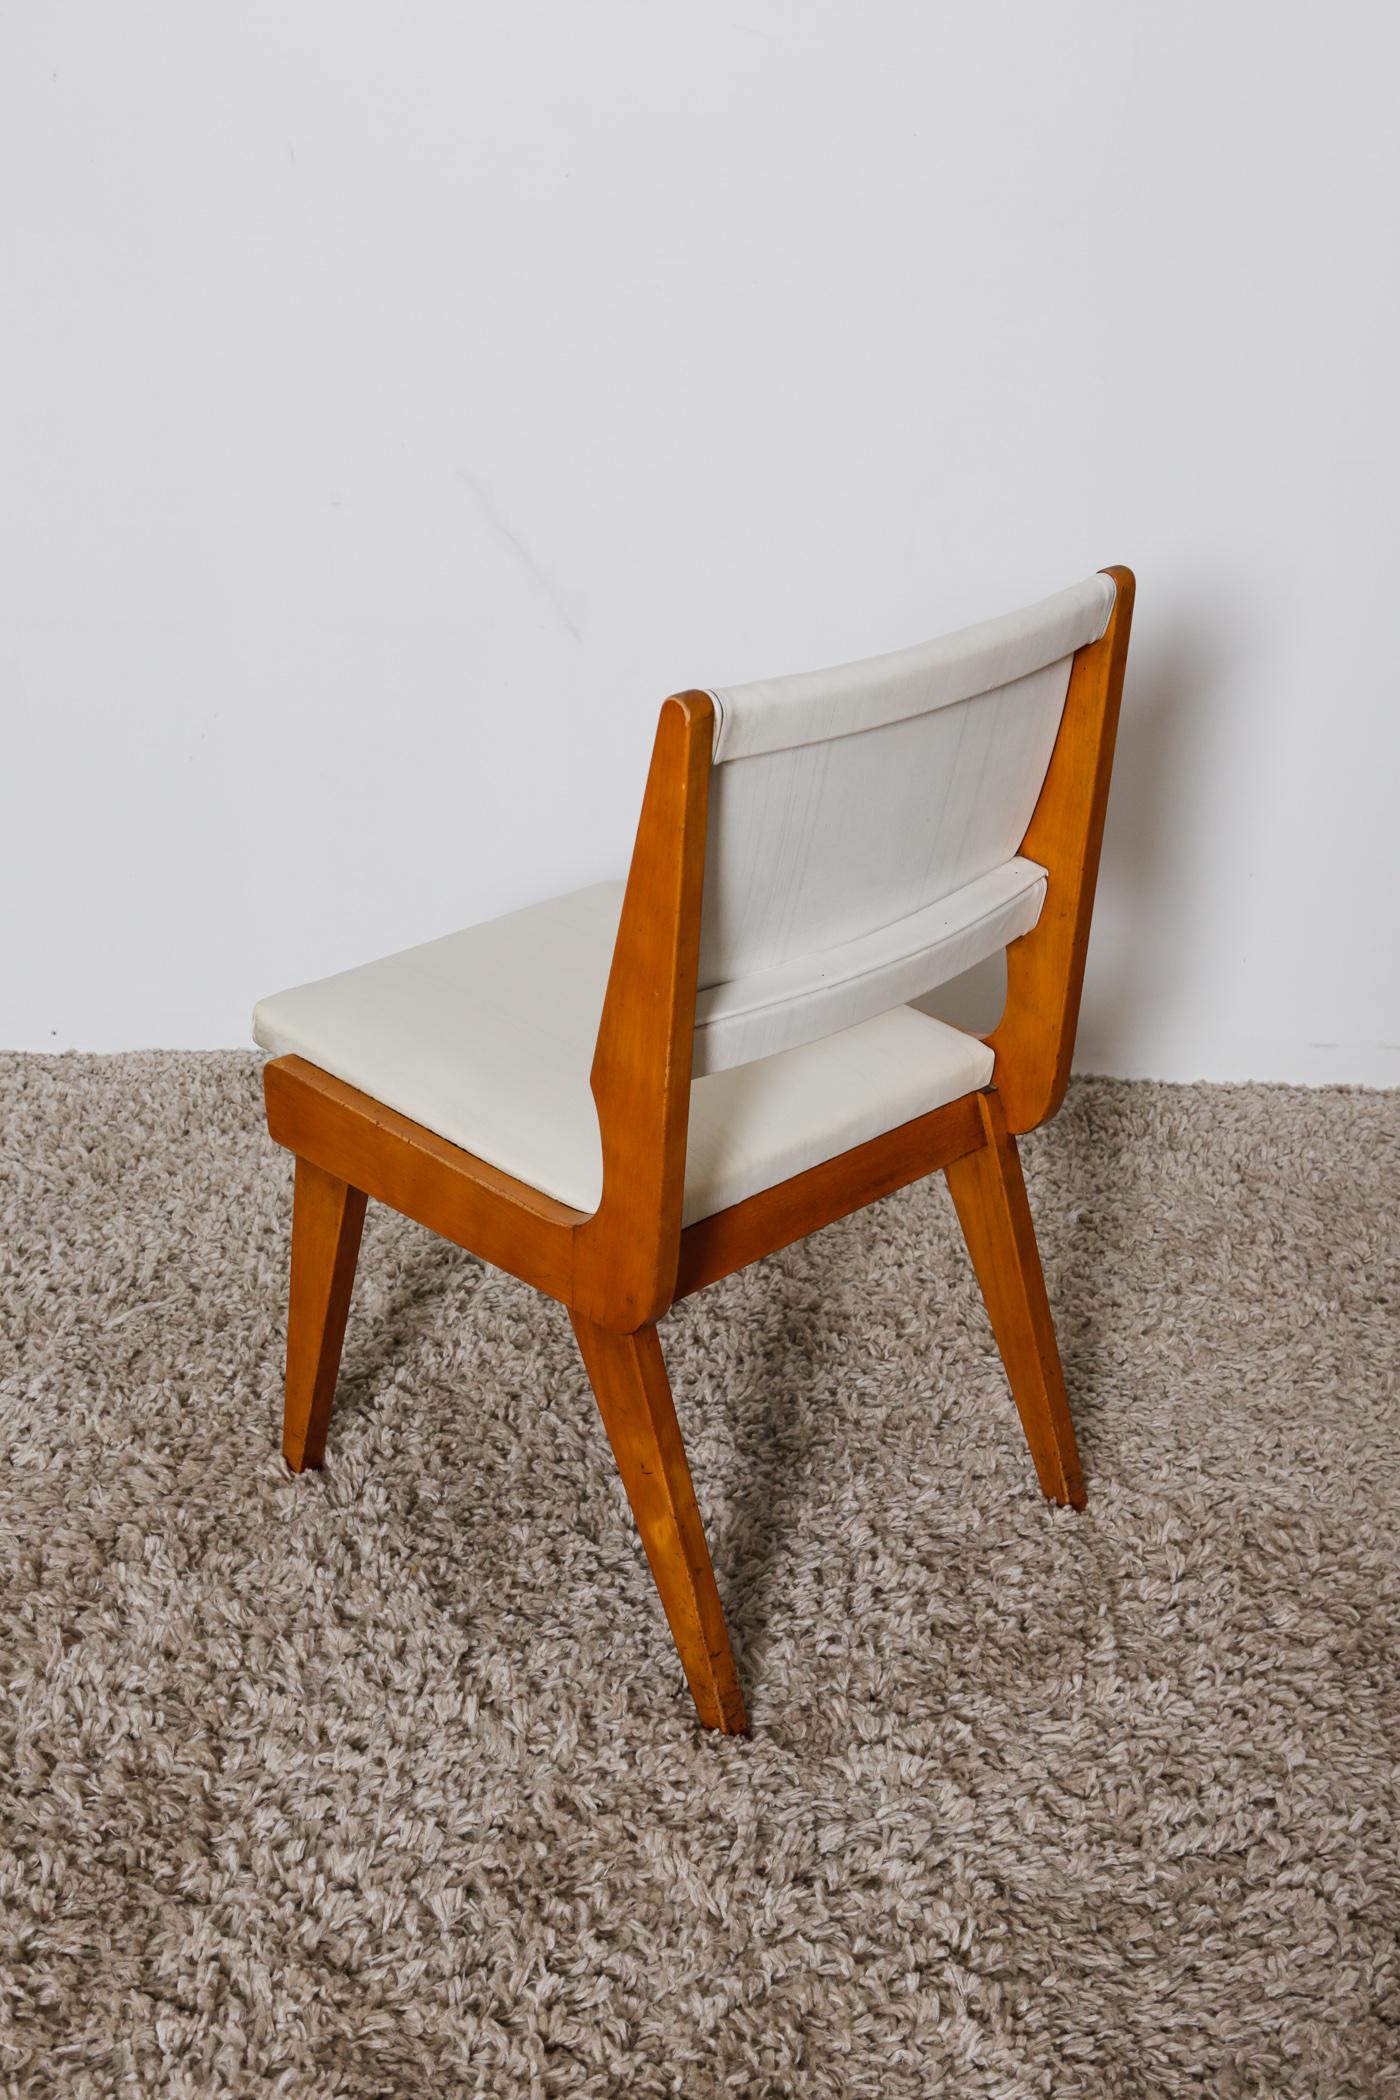 1960s Mid-Century Modern Maple Wood Dining Chairs #5976 by Feldman Brothers For Sale 6